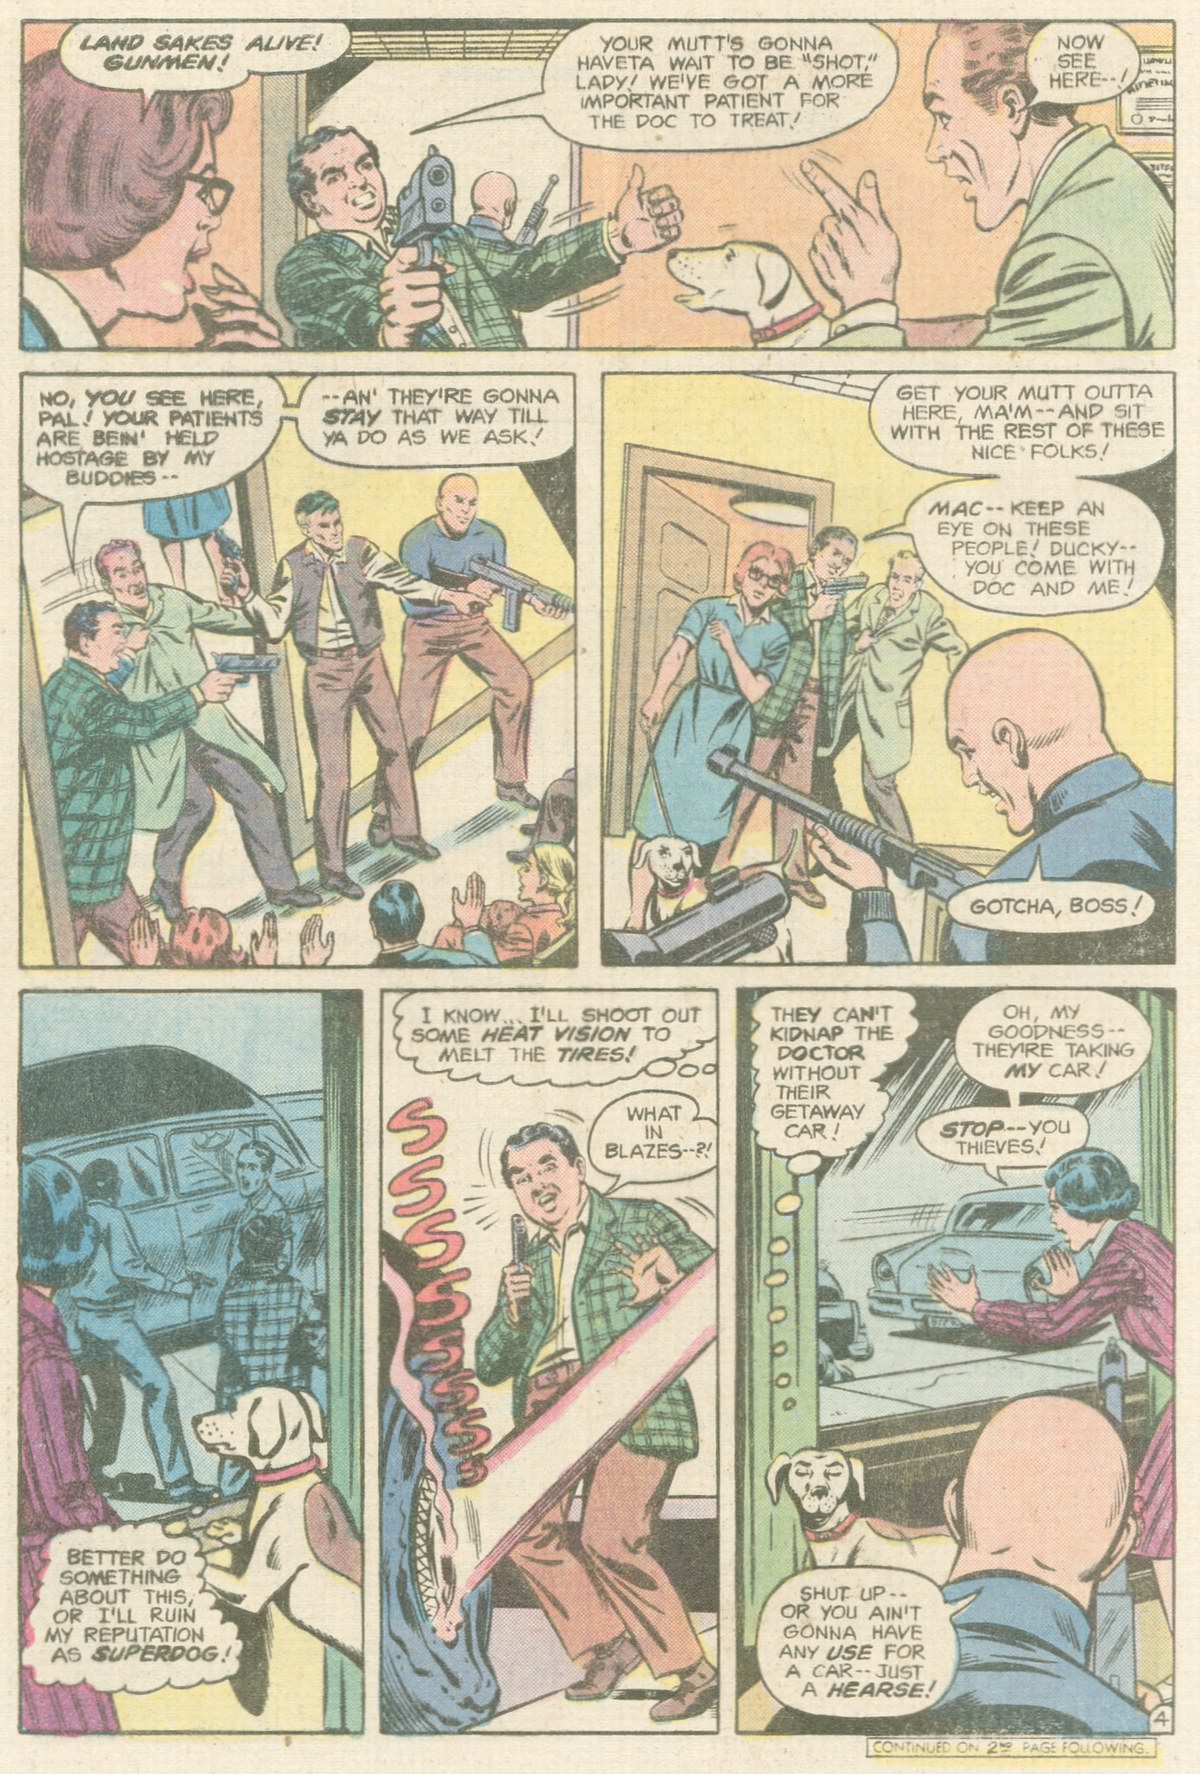 The New Adventures of Superboy 17 Page 21